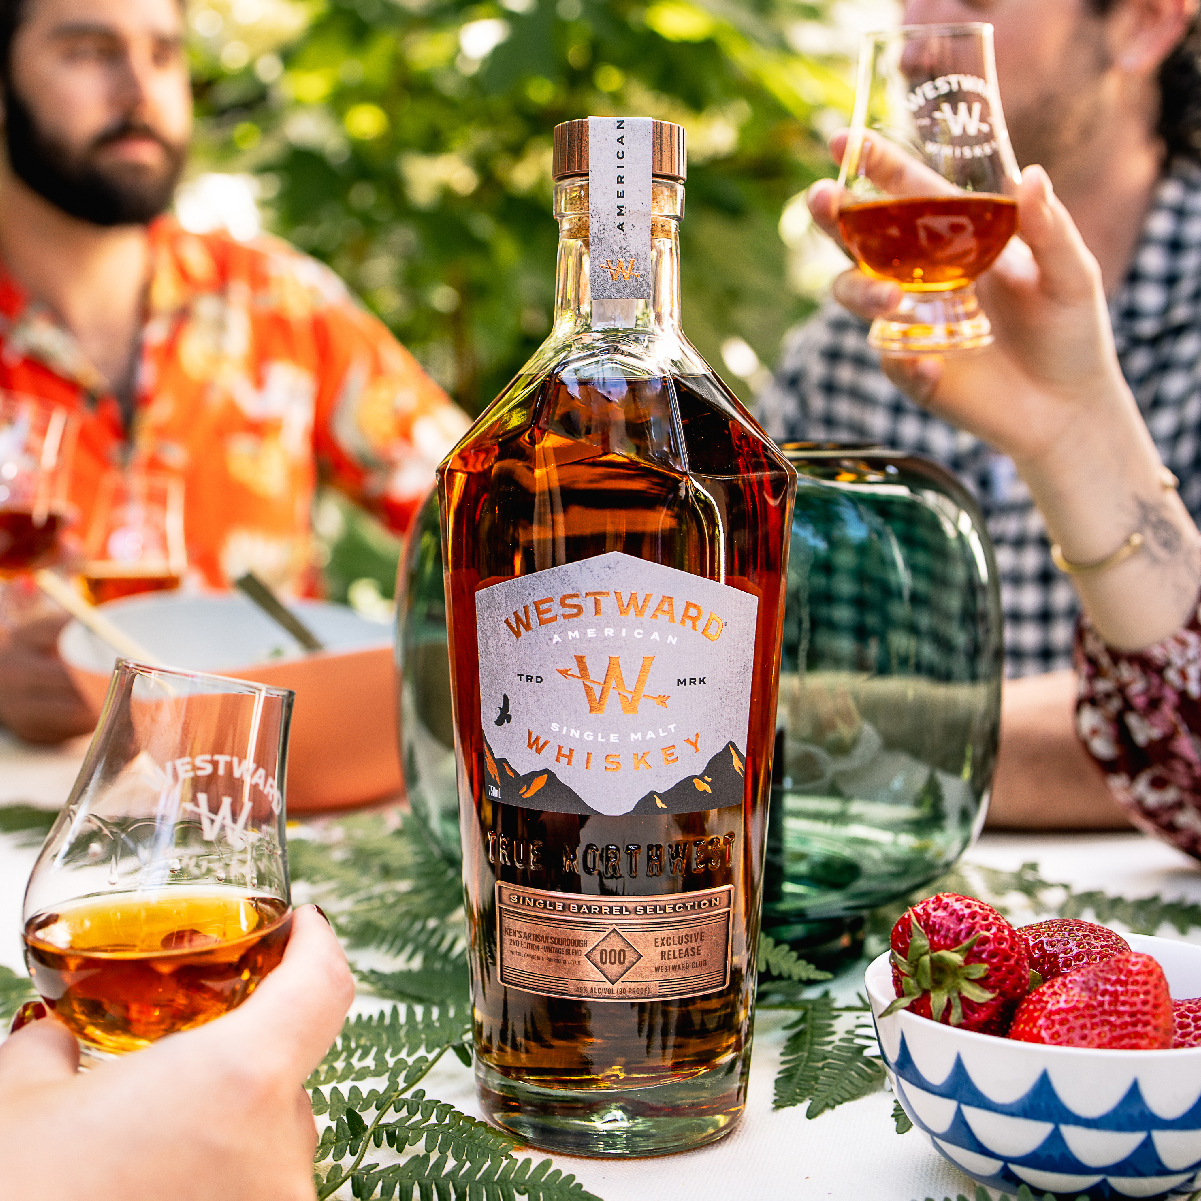 A bottle of Westward Whiskey on a table surrounded by friends.